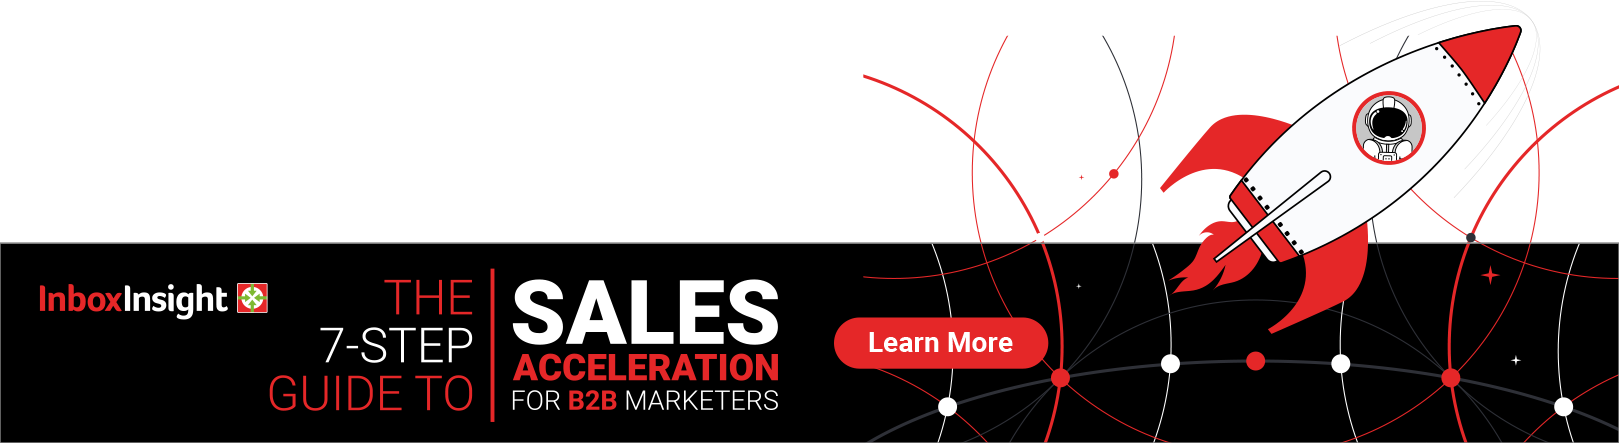 The 7-Step Guide to Sales Acceleration for B2B Marketers